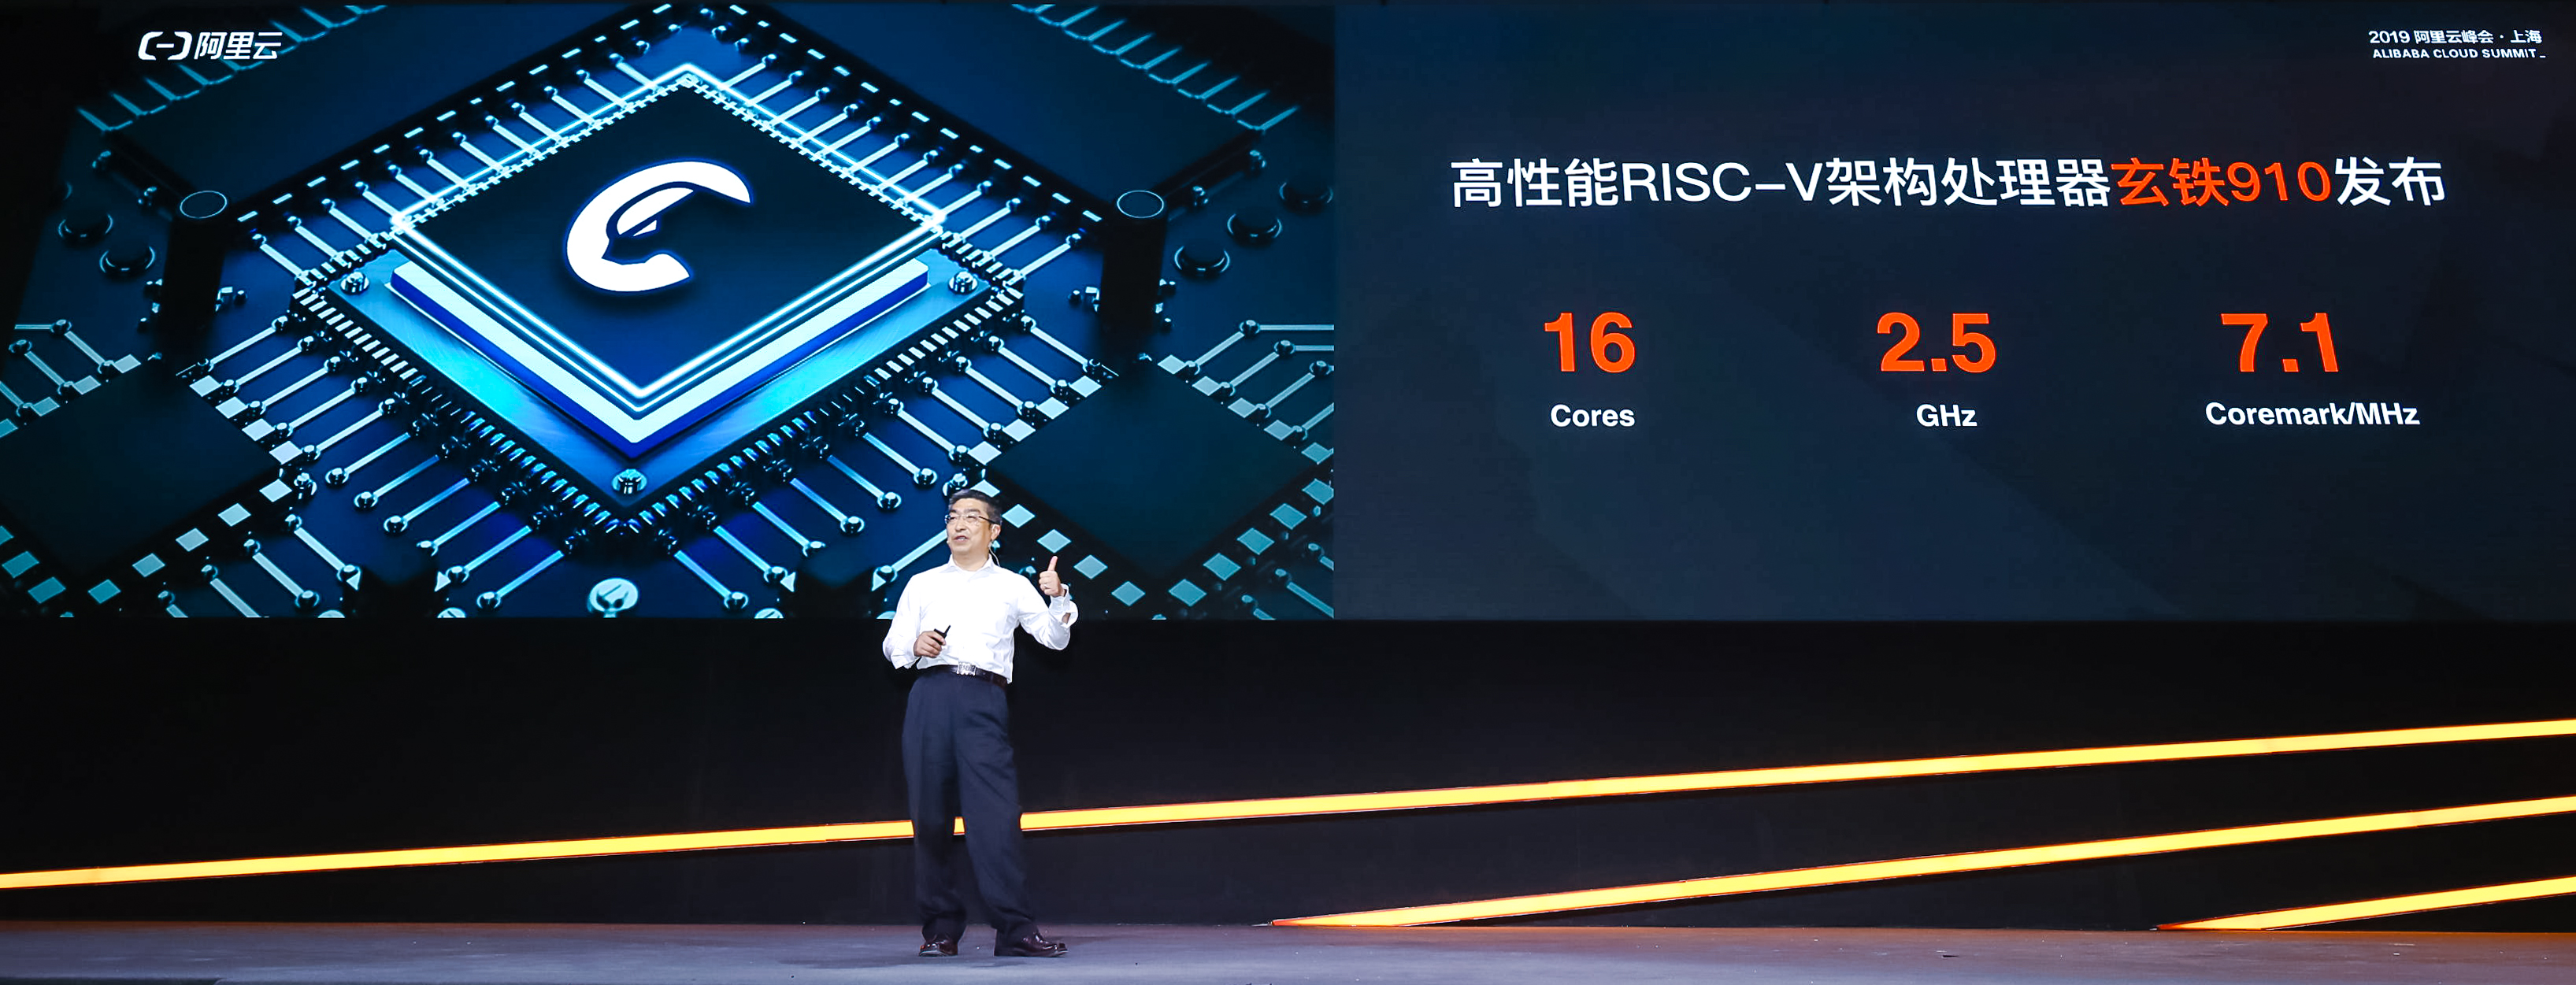 Alibaba’s Pingtouge launches own processor, aiming to be a chip infrastructure provider for AI and IoT